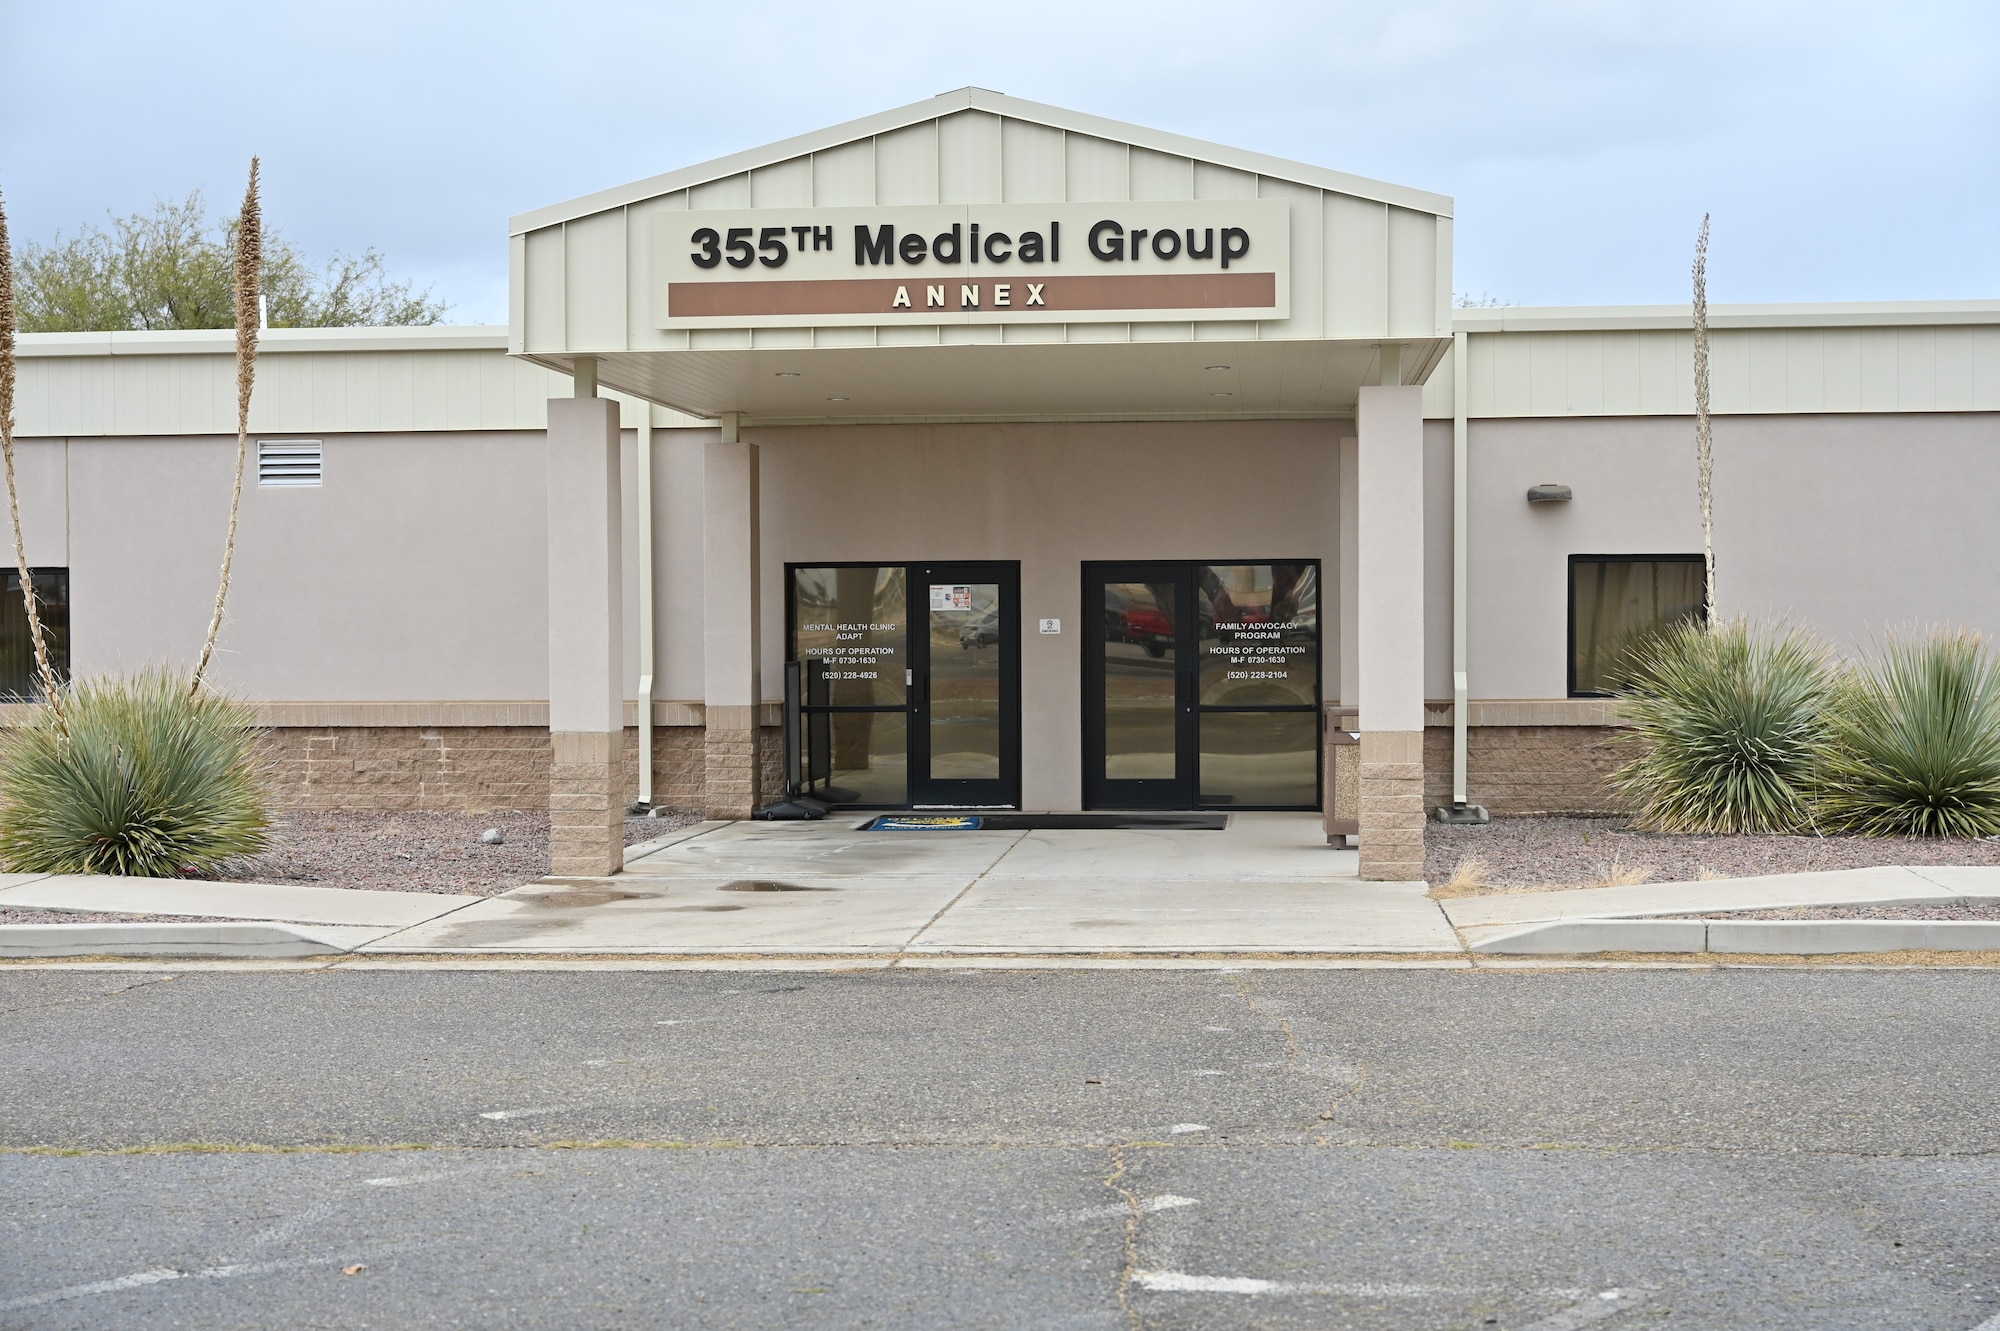 Pictured above is a building representing the 355th Medical Group.